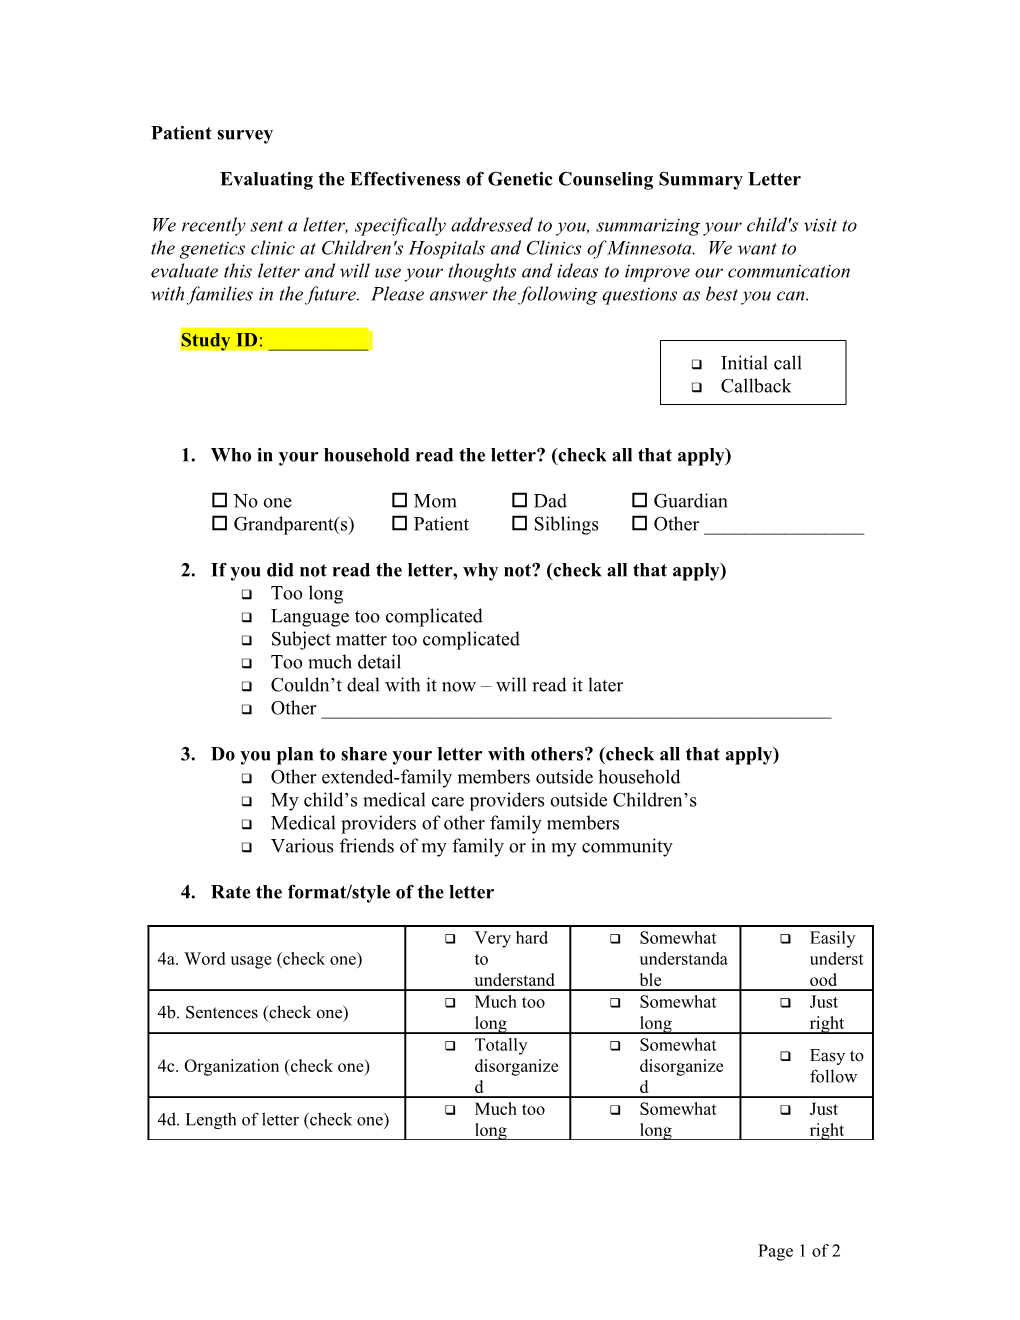 Evaluating the Effectiveness of Genetic Counseling Summary Letter